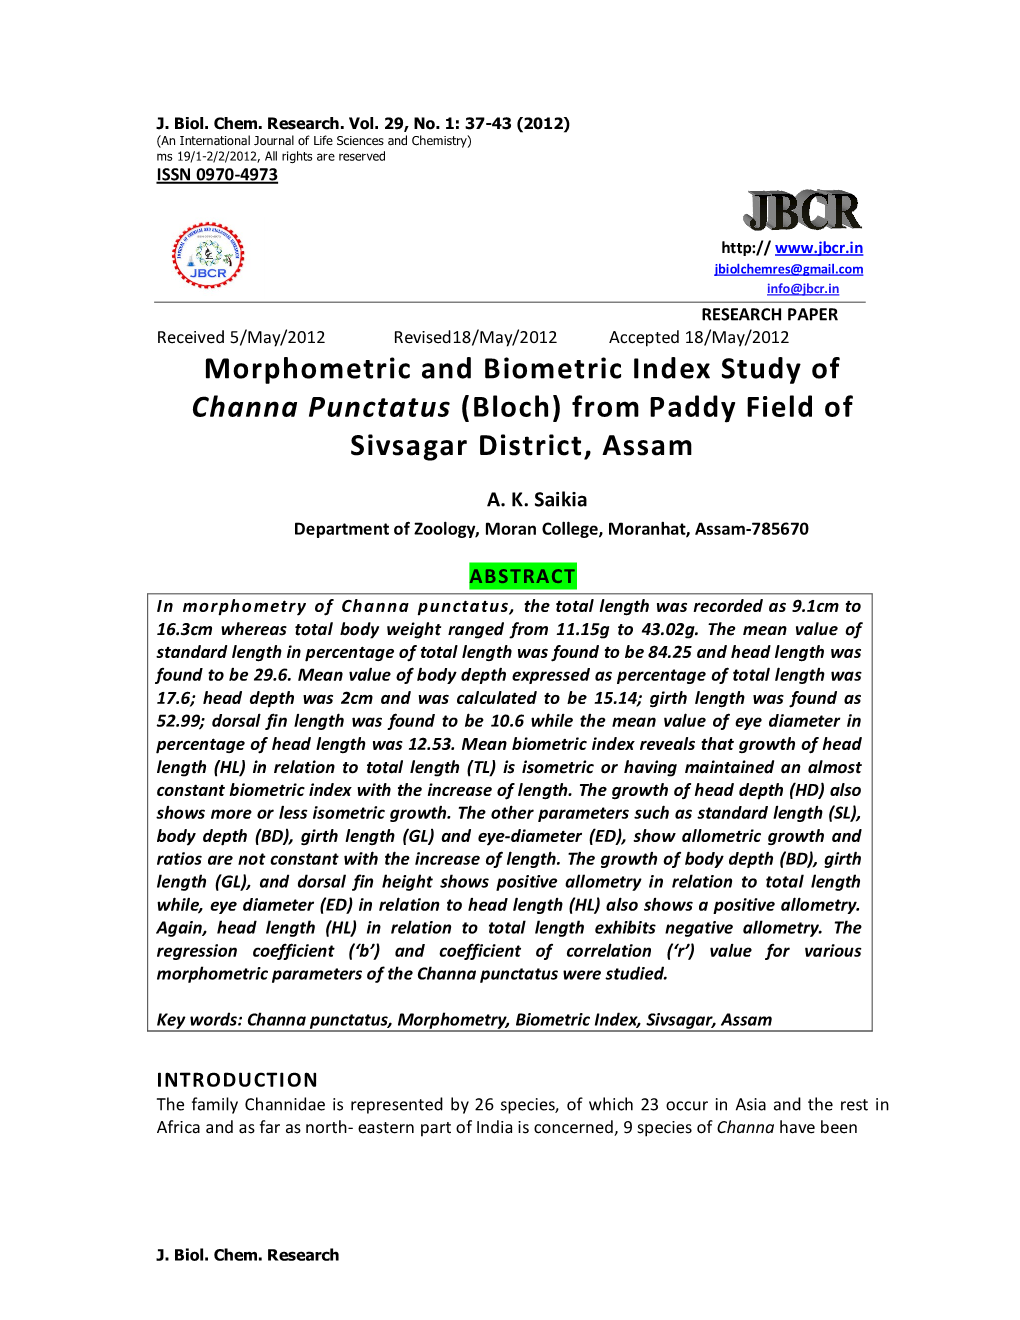 Morphometric and Biometric Index Study of Channa Punctatus (Bloch) from Paddy Field of Sivsagar District, Assam